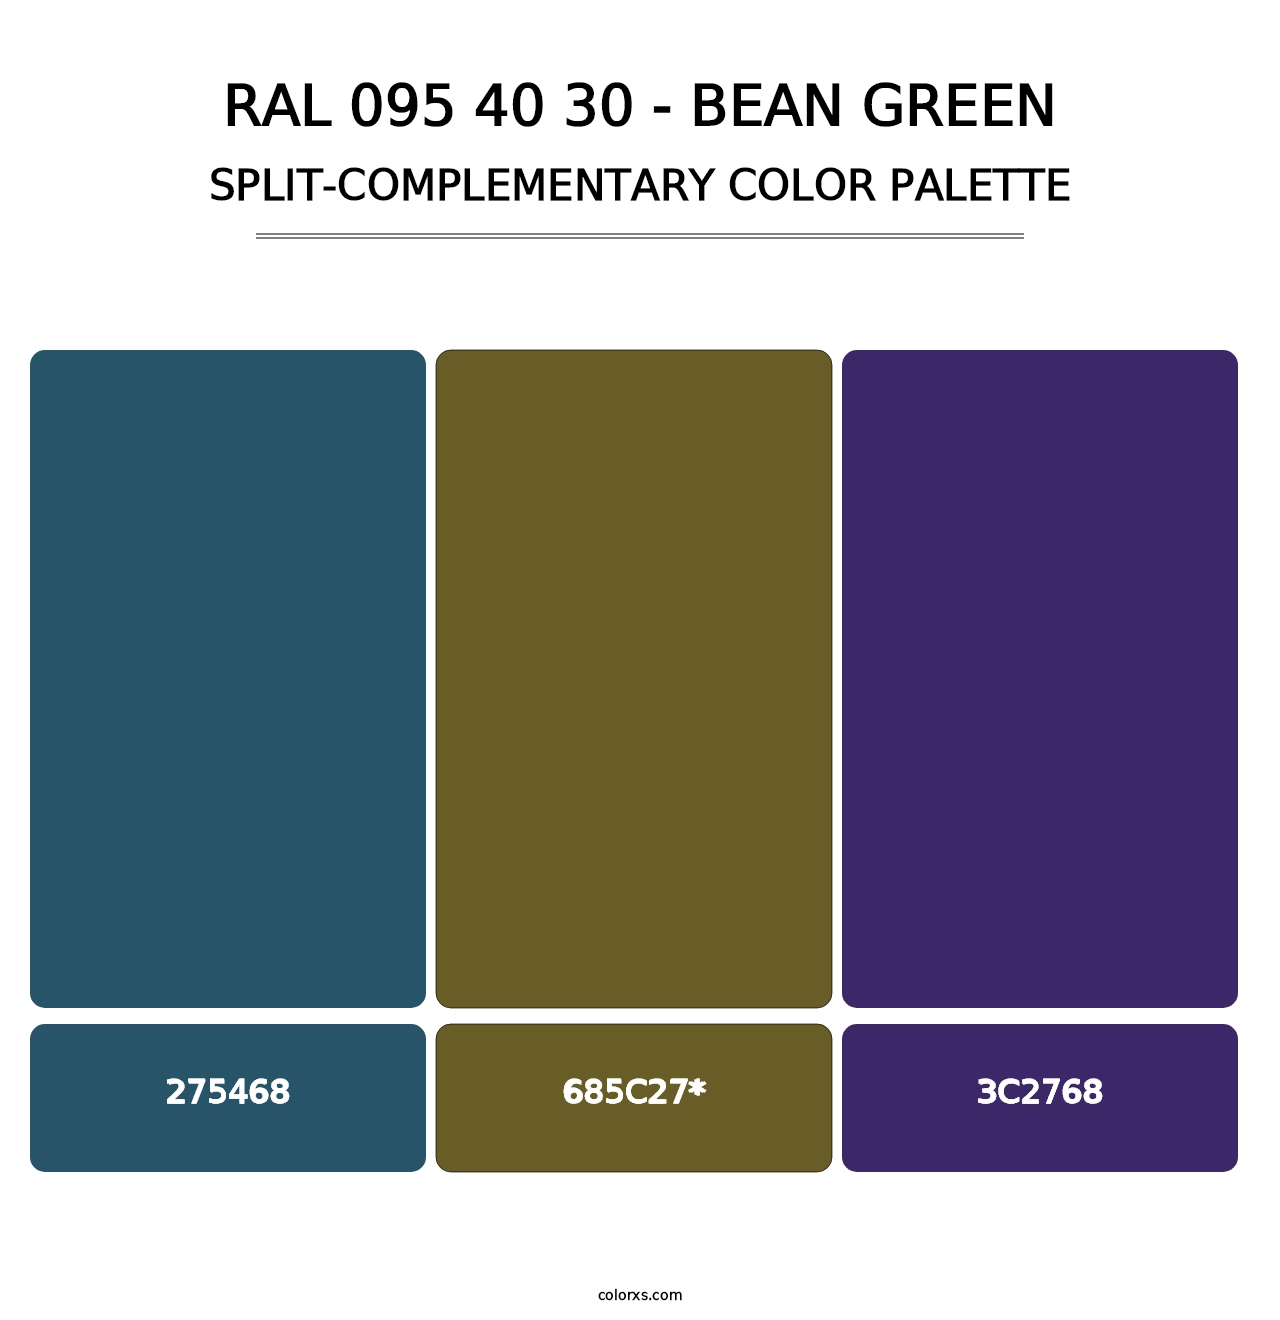 RAL 095 40 30 - Bean Green - Split-Complementary Color Palette